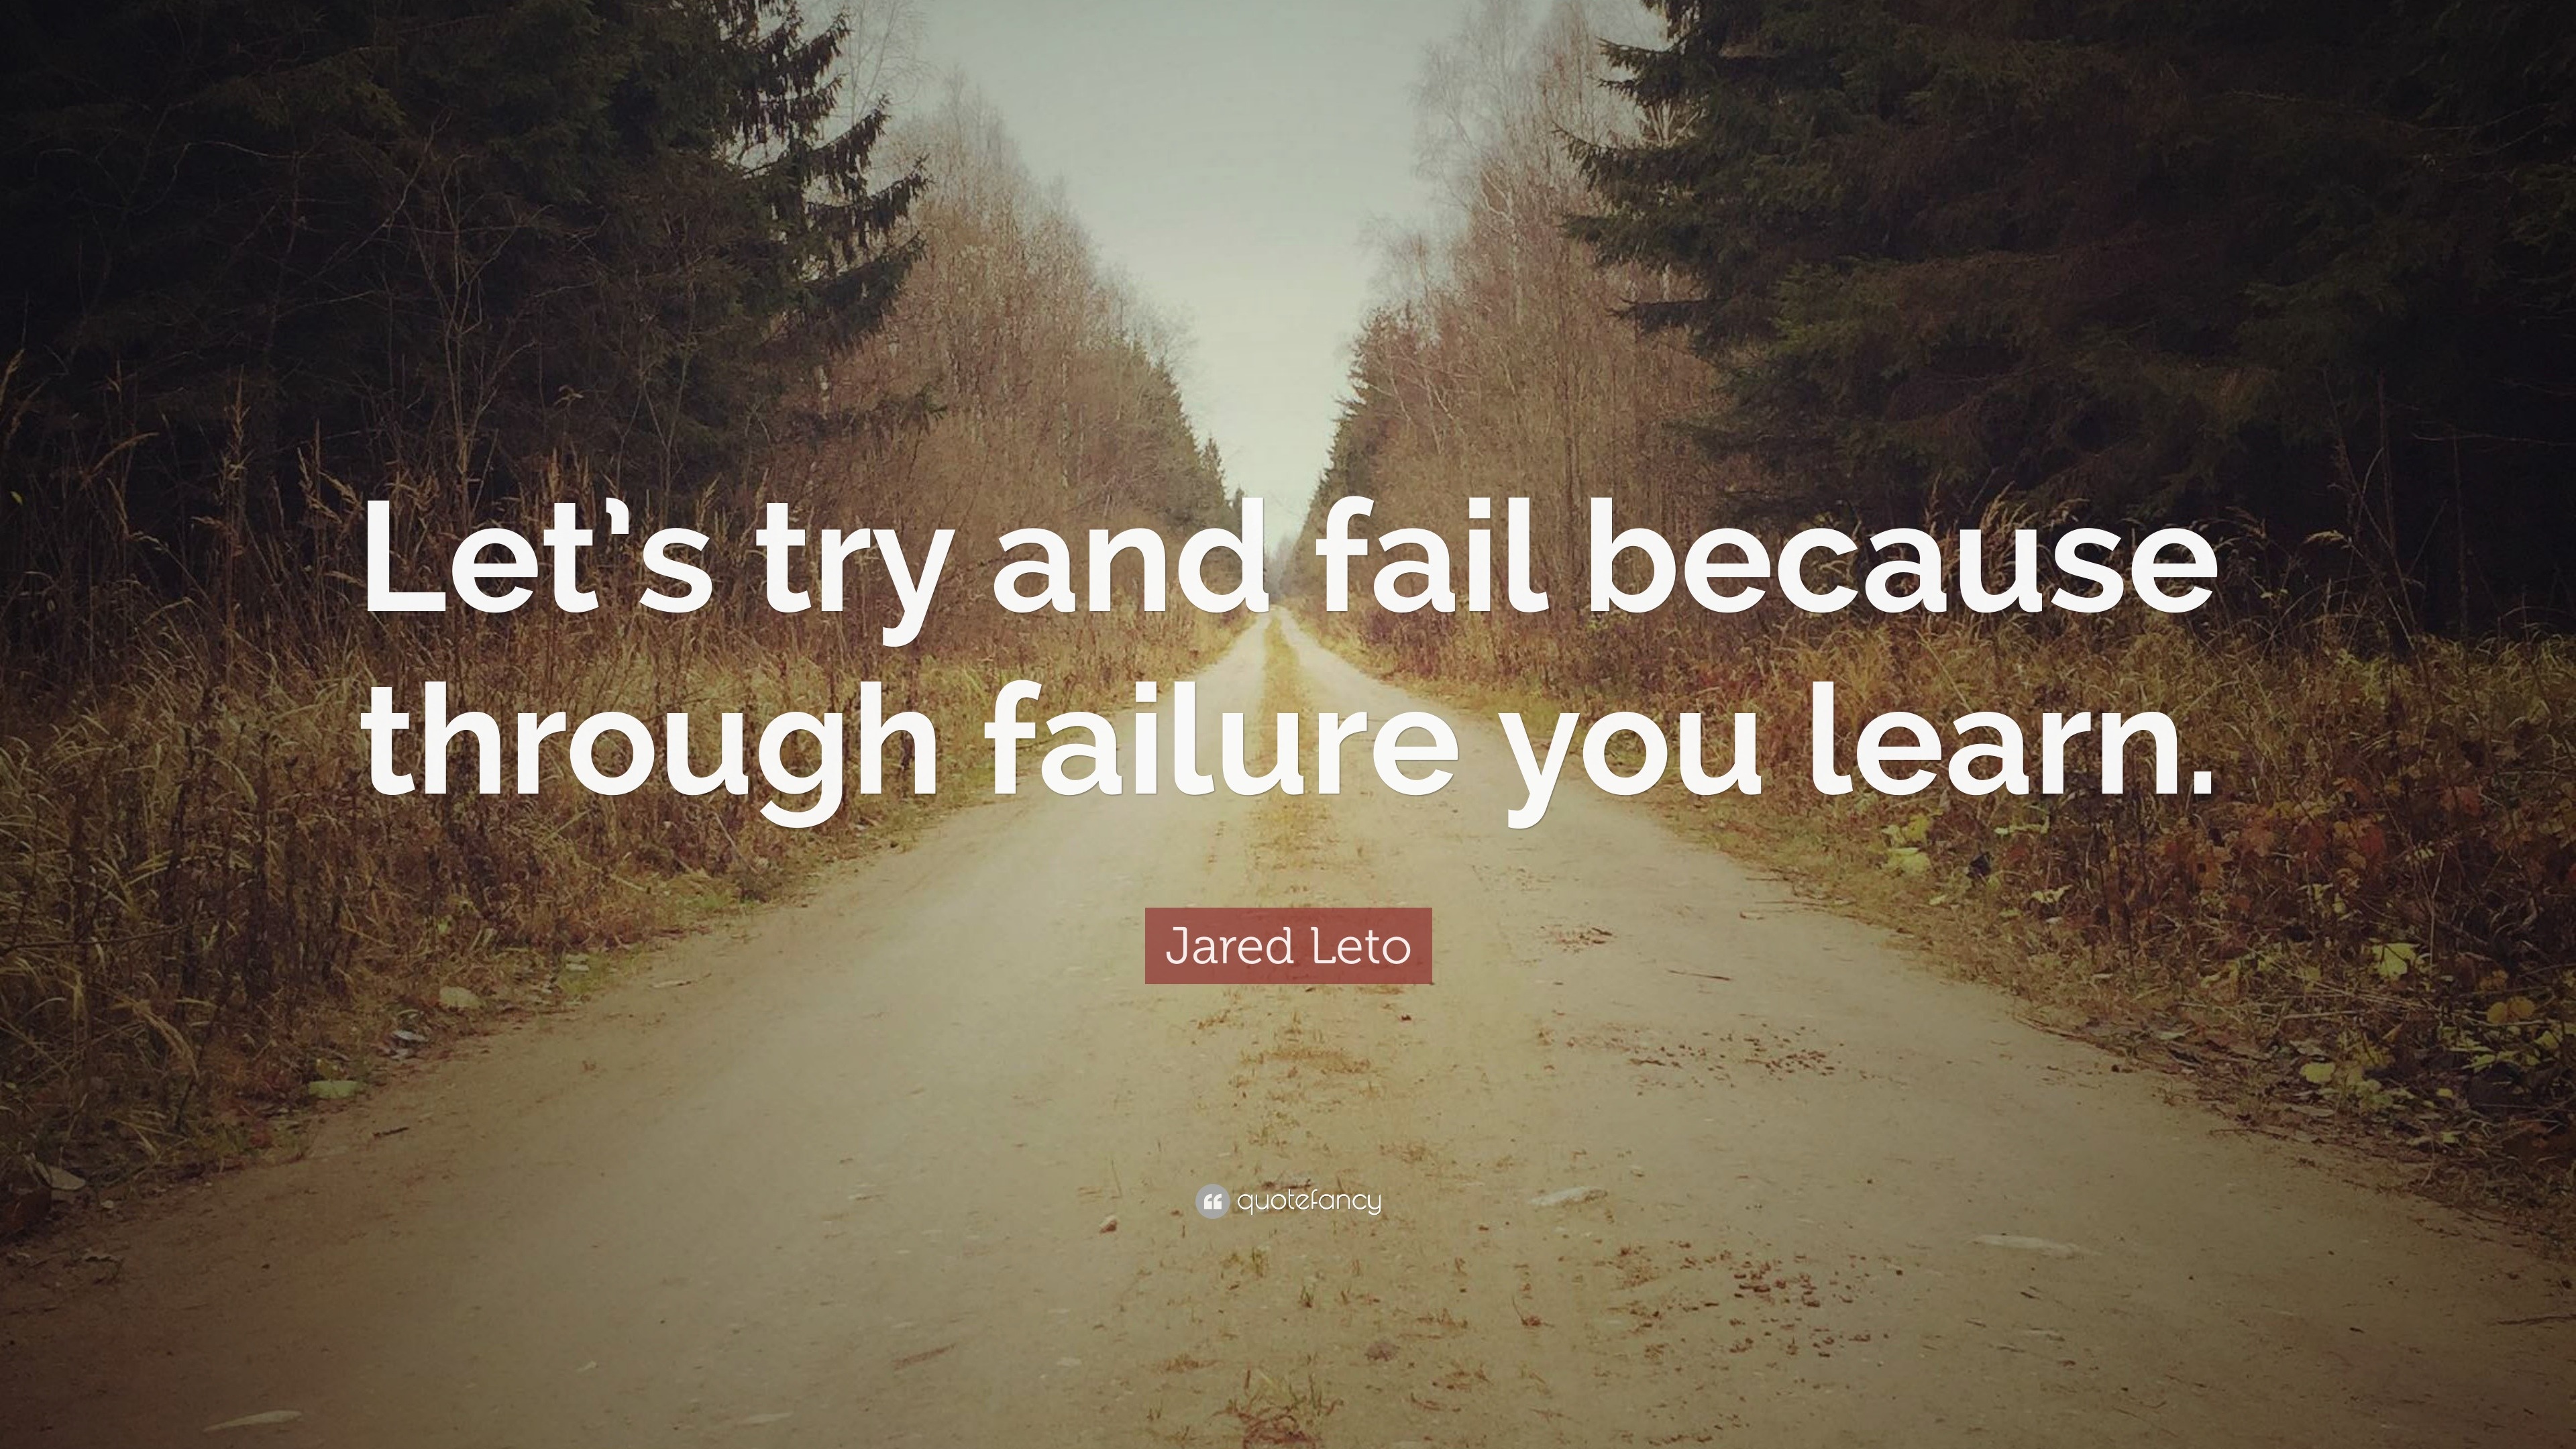 Jared Leto Quote: “Let’s try and fail because through failure you learn.”